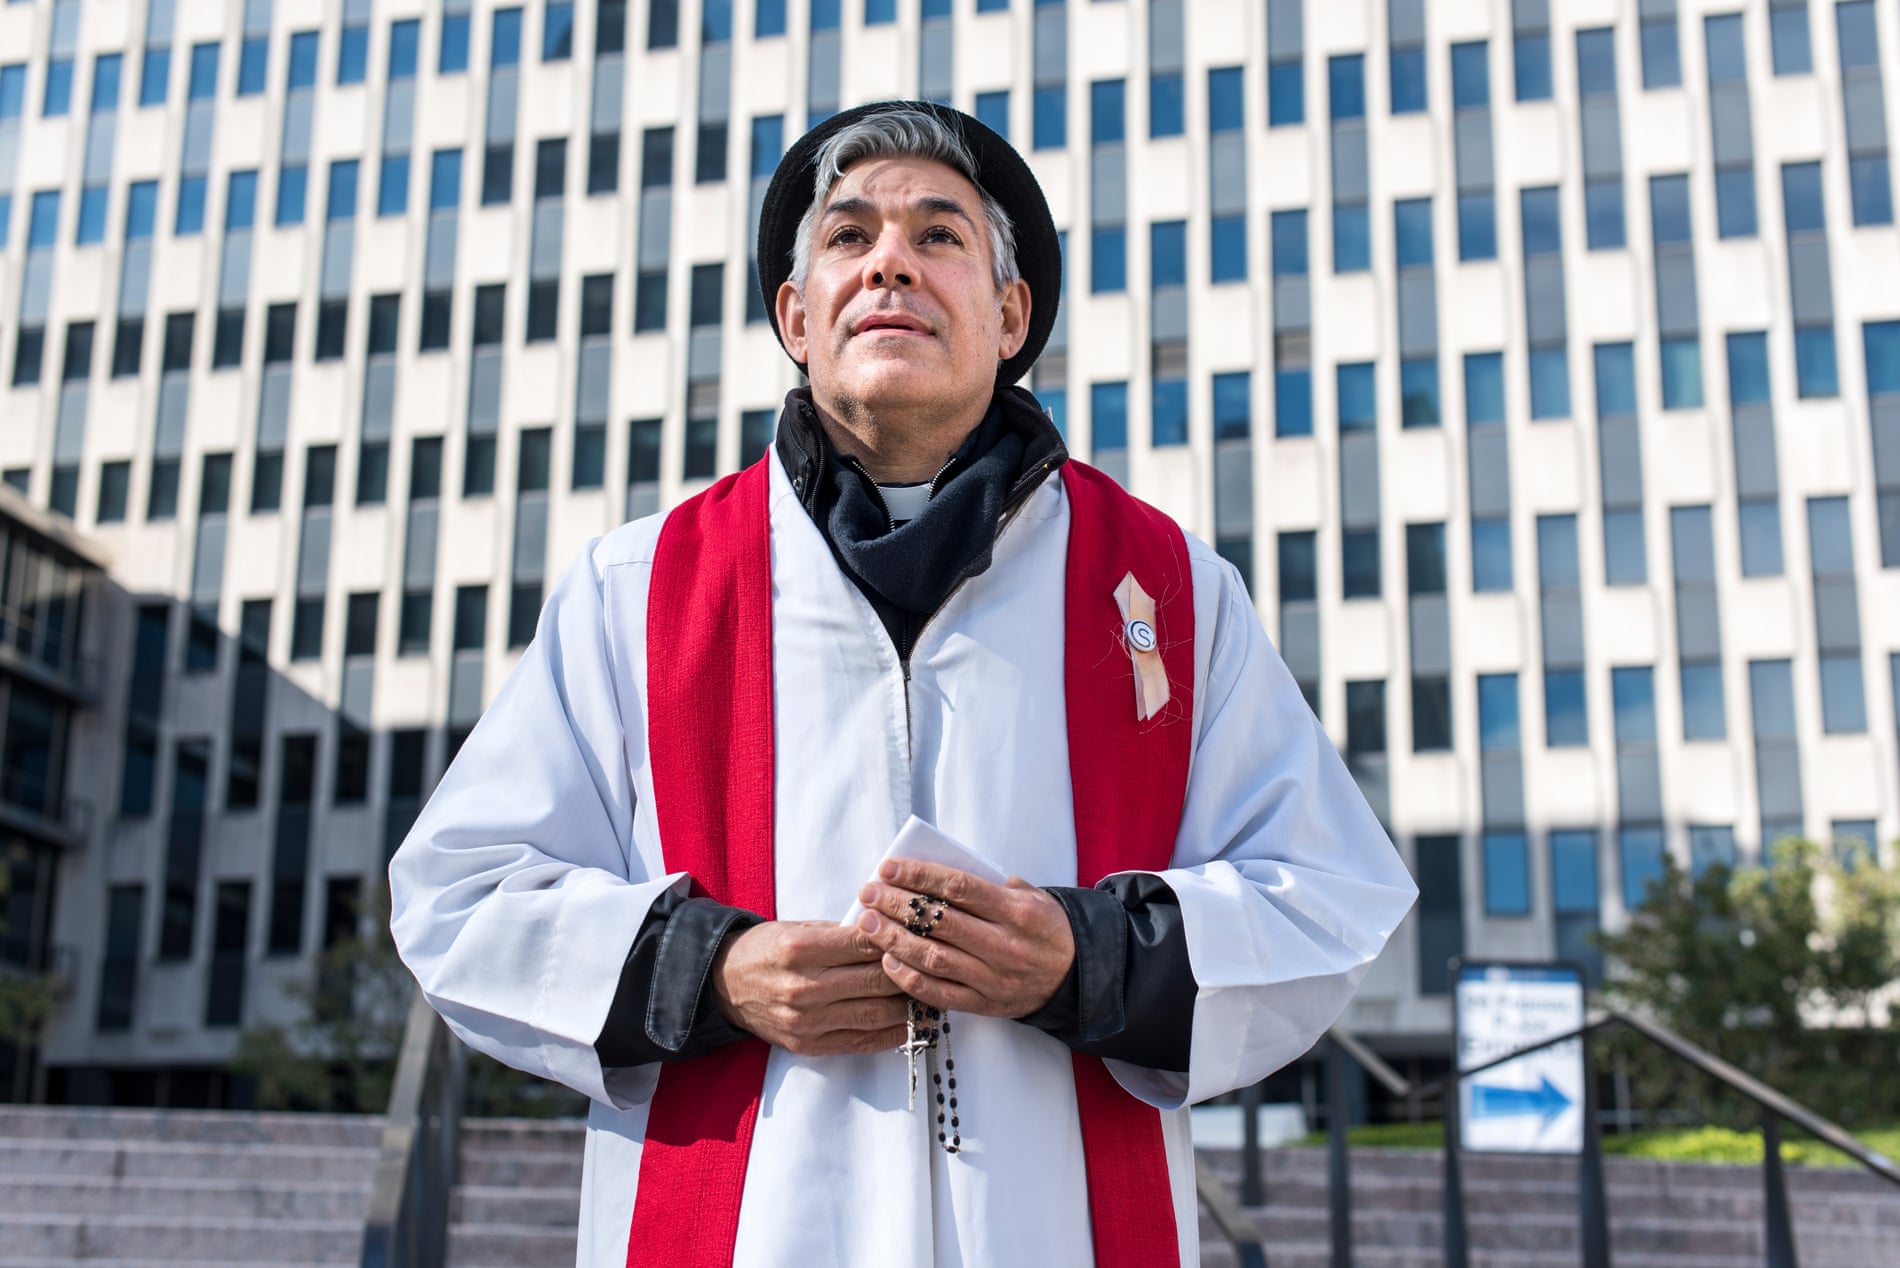 Pastor Fabian Arias of Iglesia de Sion, a Spanish-speaking congregation, leads a Jericho March outside of 26 Federal Plaza.